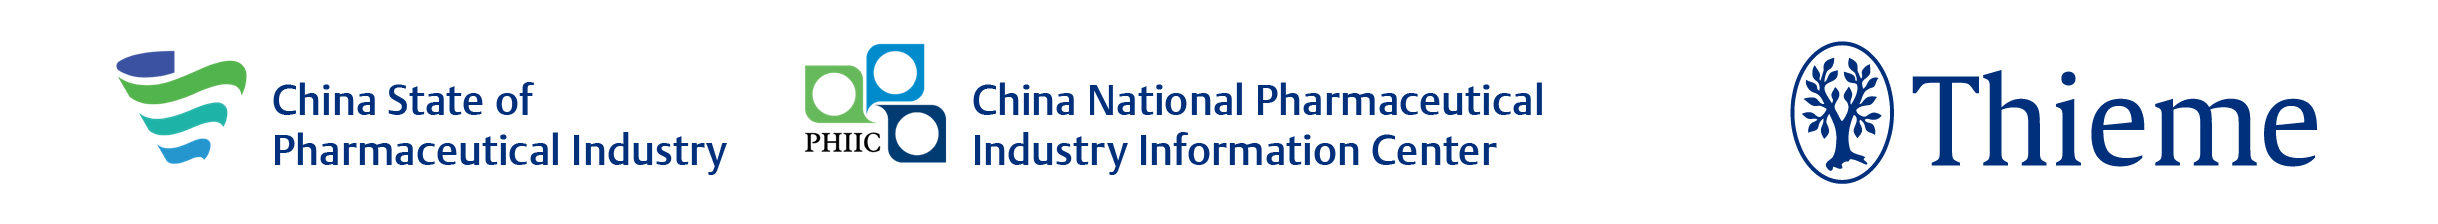 PhF_Pharmaceutical_Fronts_TPC_k4-1.png